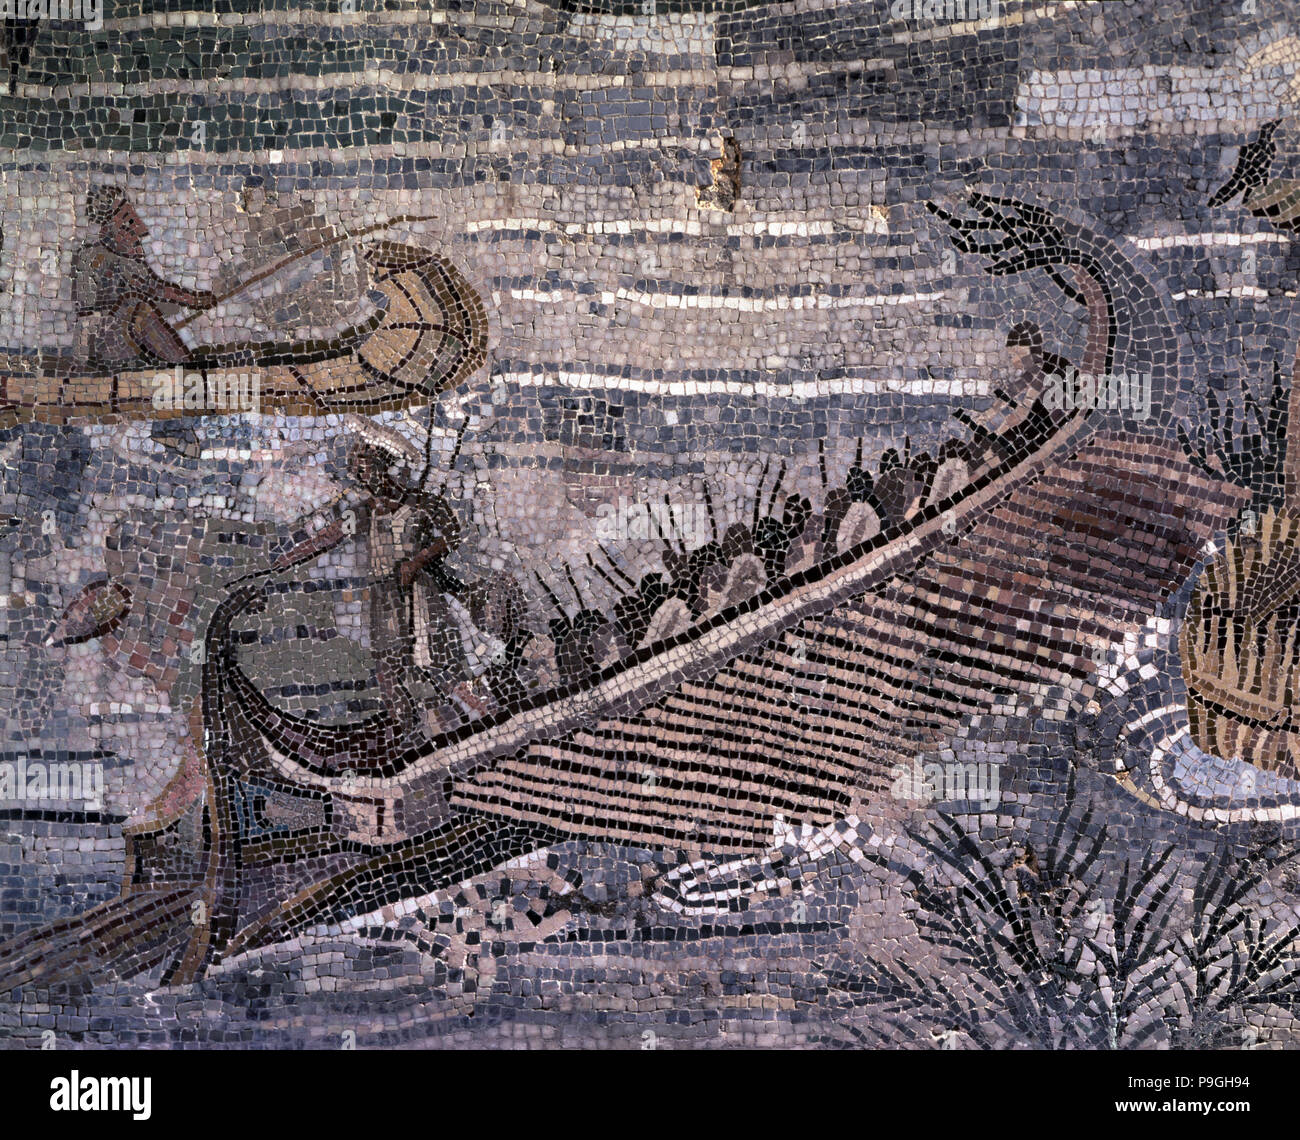 File:Detail of the Lod Mosaic, a Roman merchant ship with red and white  flags on